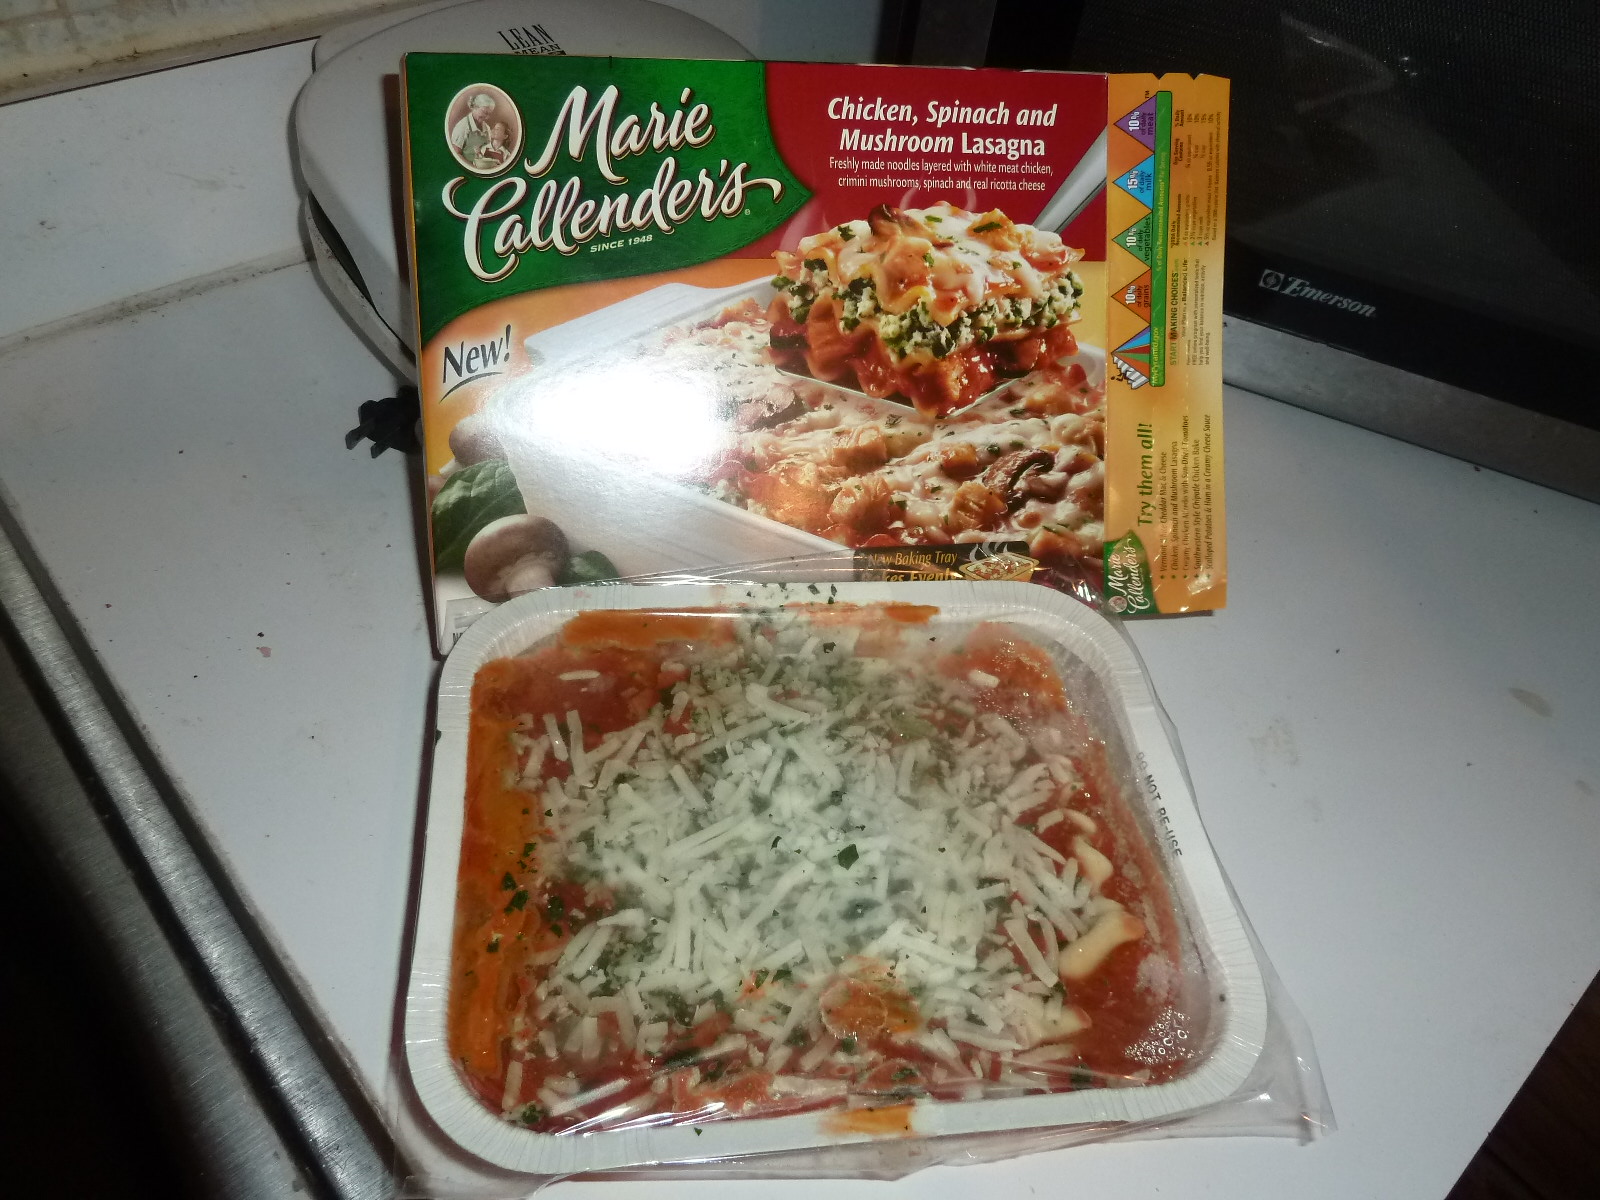 FREE IS MY LIFE: REVIEW & GIVEAWAY: Marie Callender's New Baked Meals - CONTEST ENDS 11/23 (CLOSED)